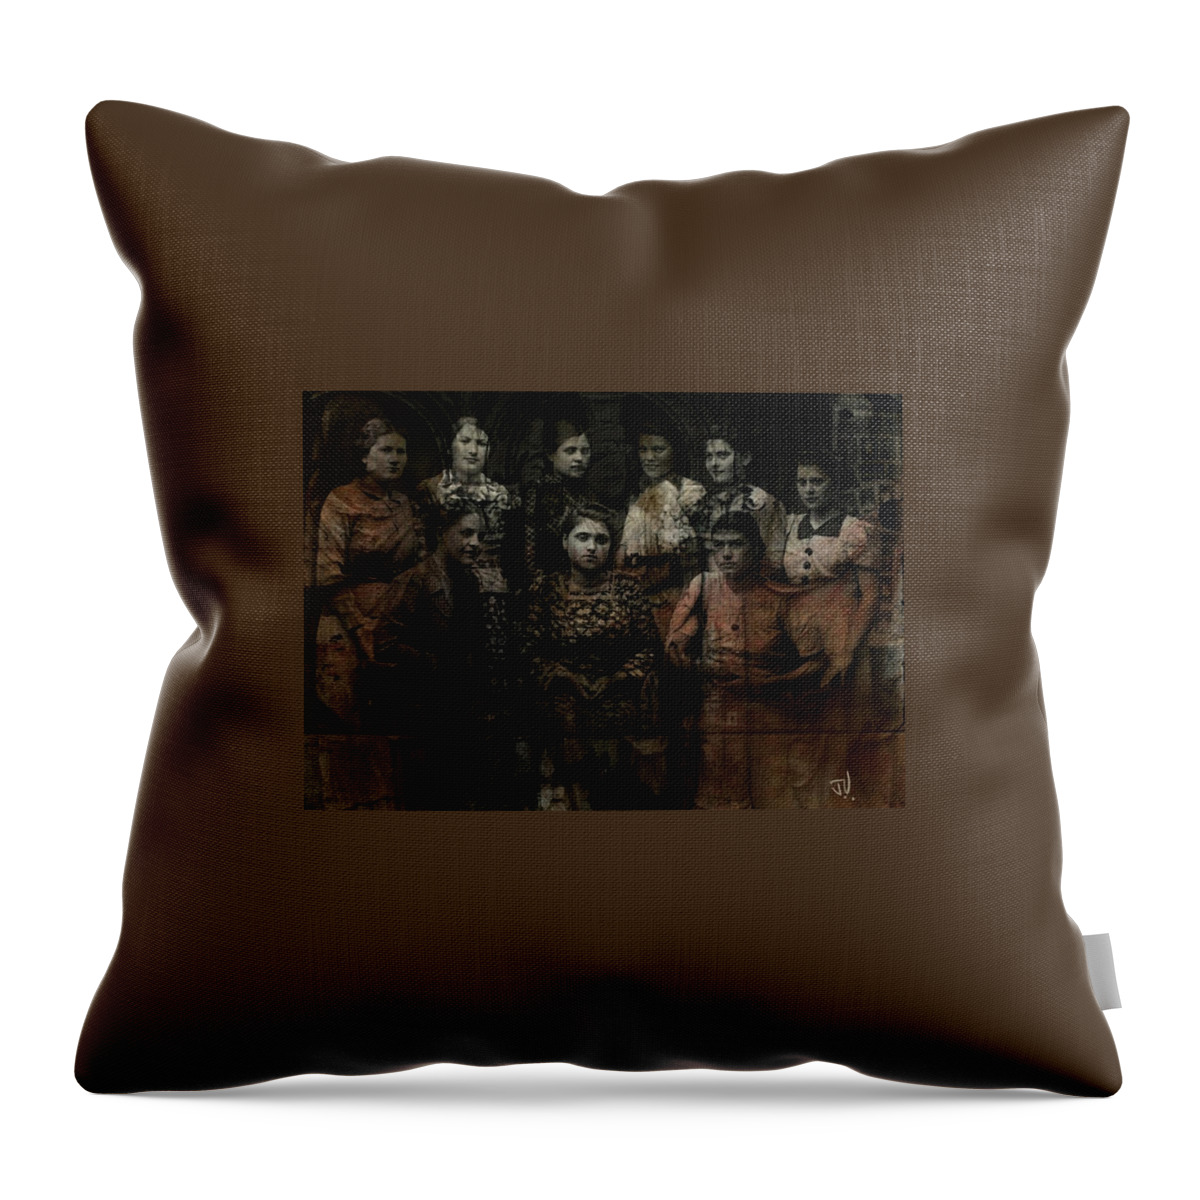 Group Throw Pillow featuring the photograph Group Portrait by Jim Vance